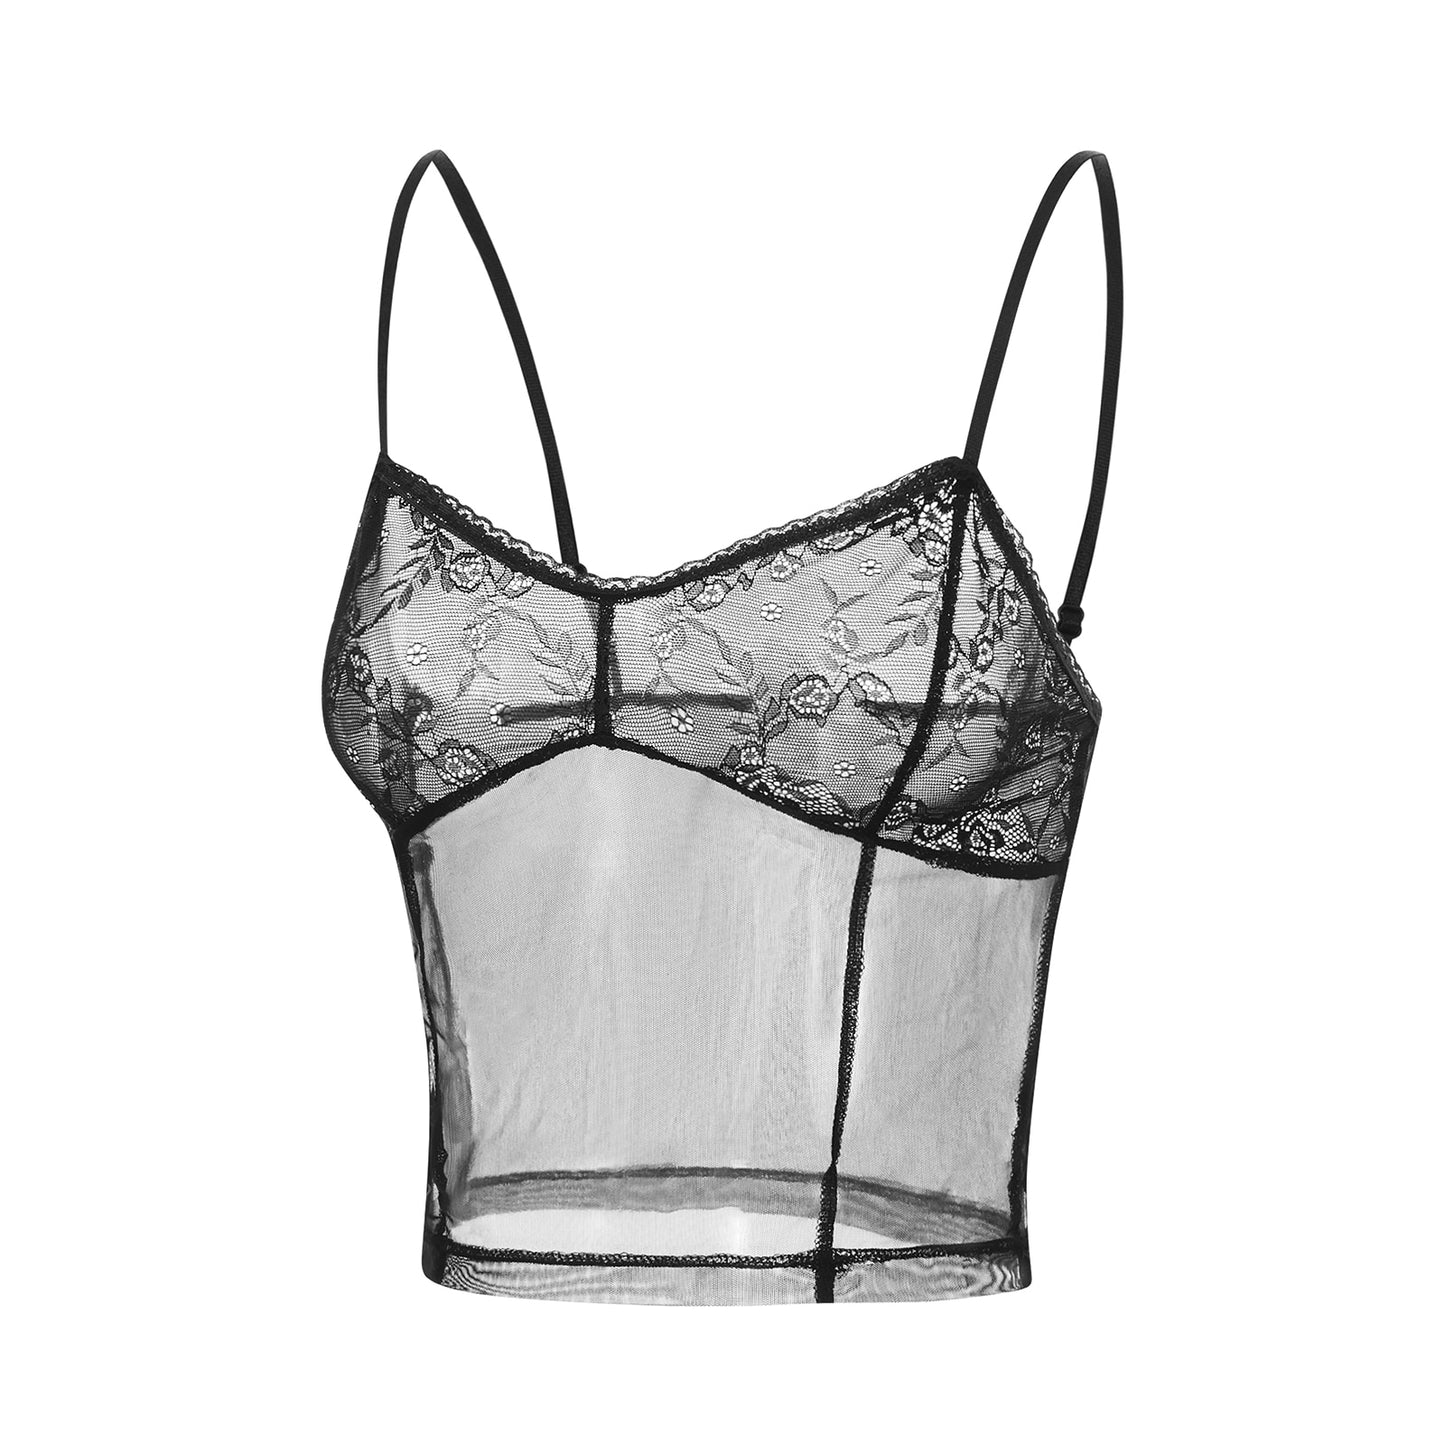 Lace See-through Cami Tank Top